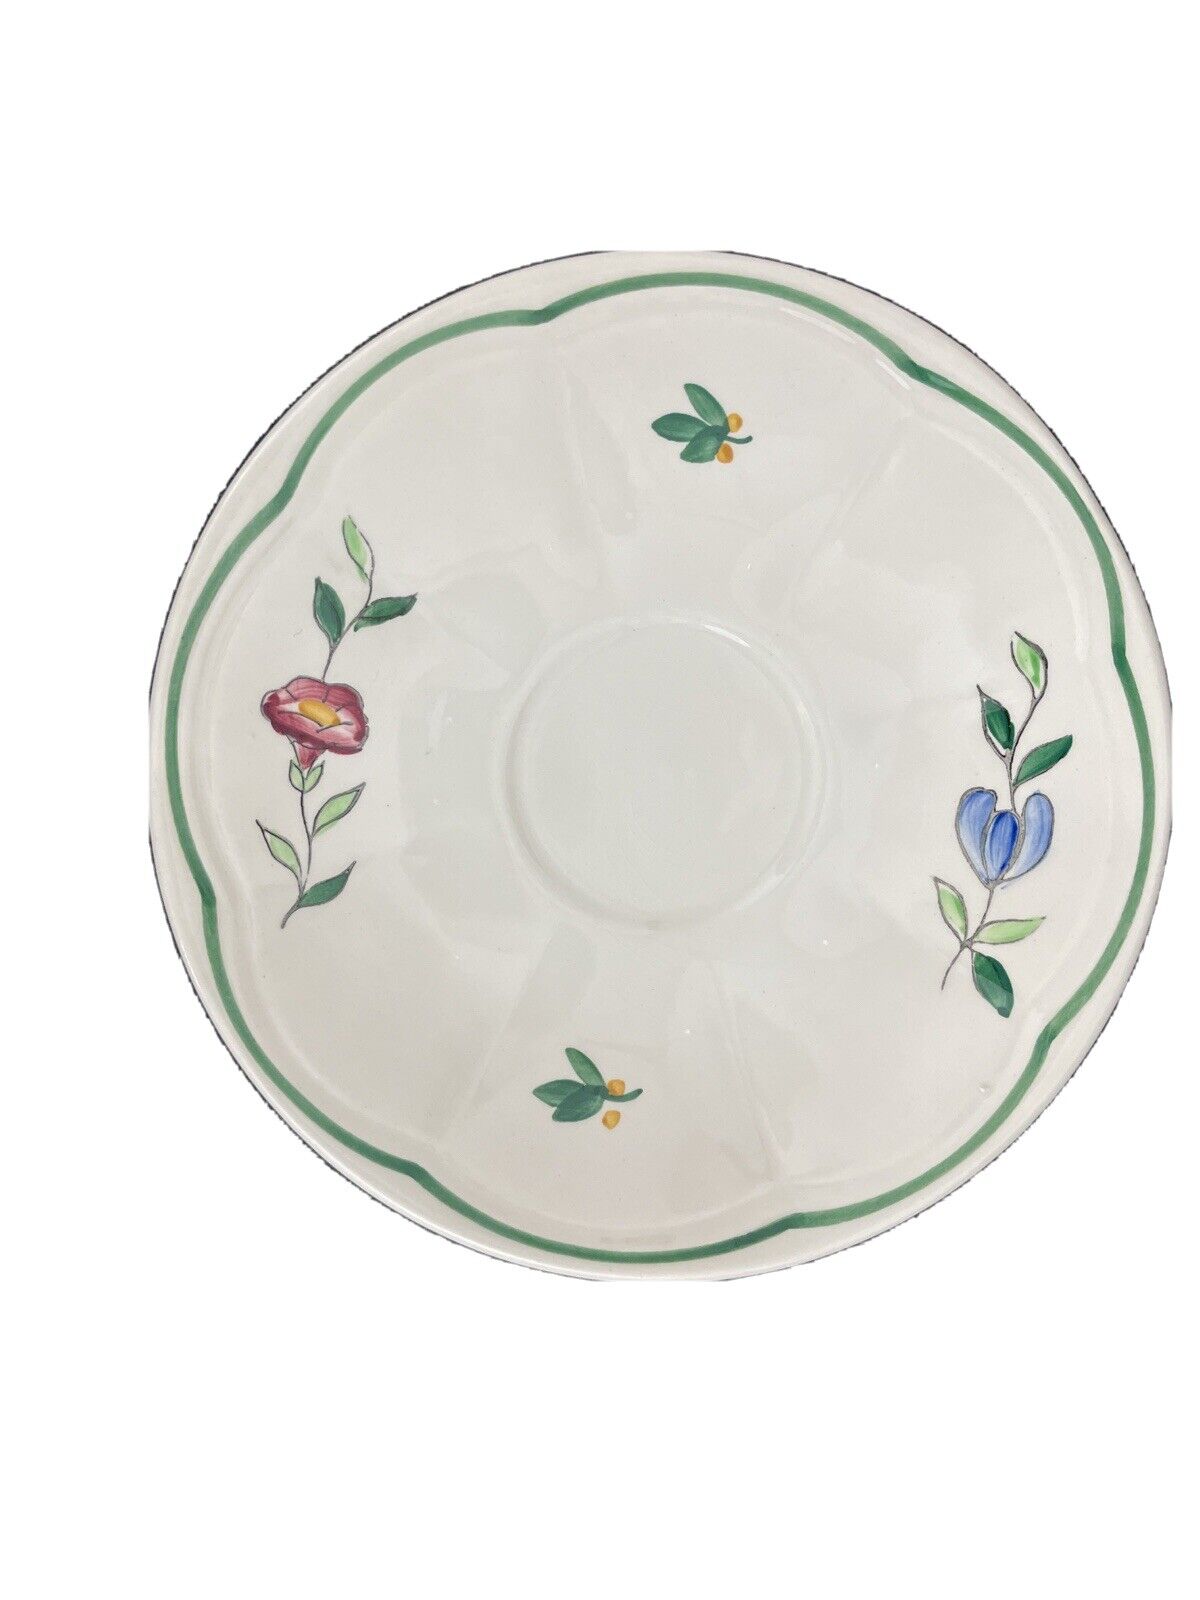 Longchamp Saucer Plate Tulip Red Green Ring 